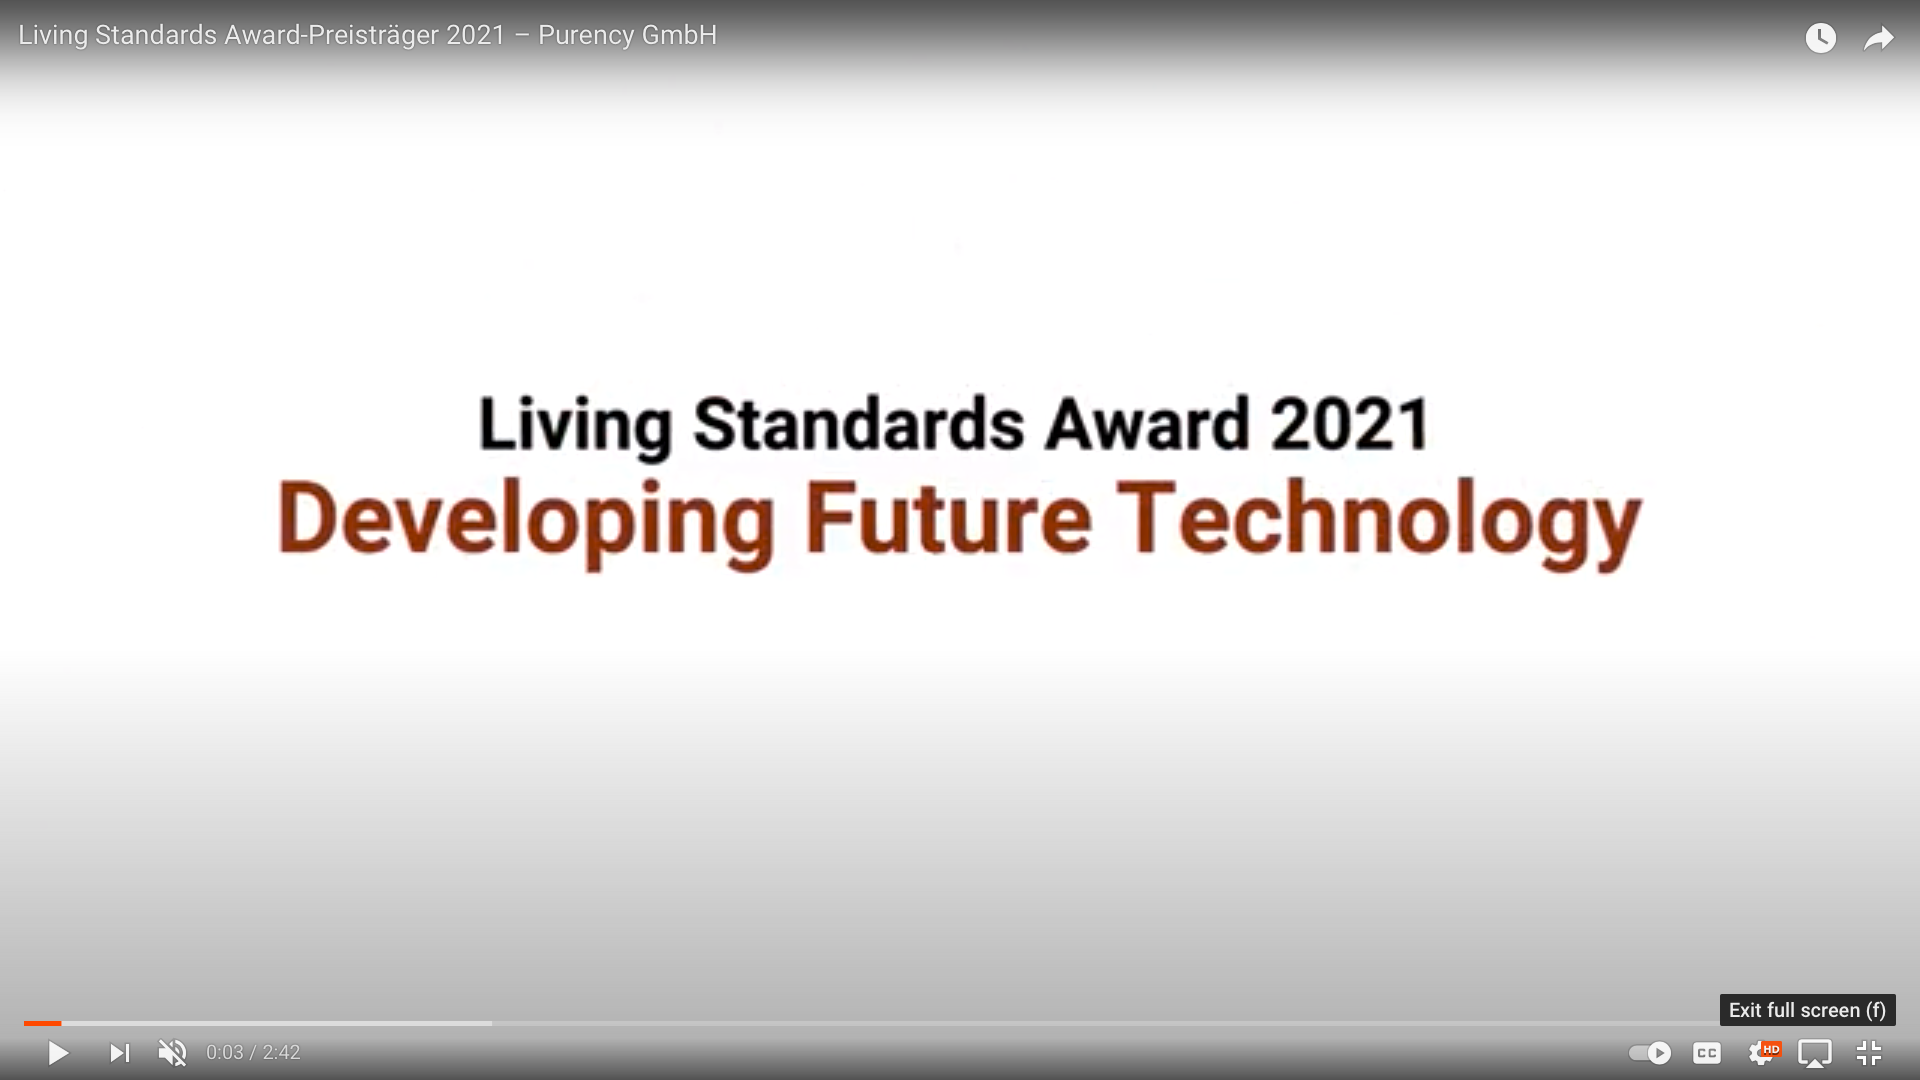 Purency wins Living Standards Award 2021